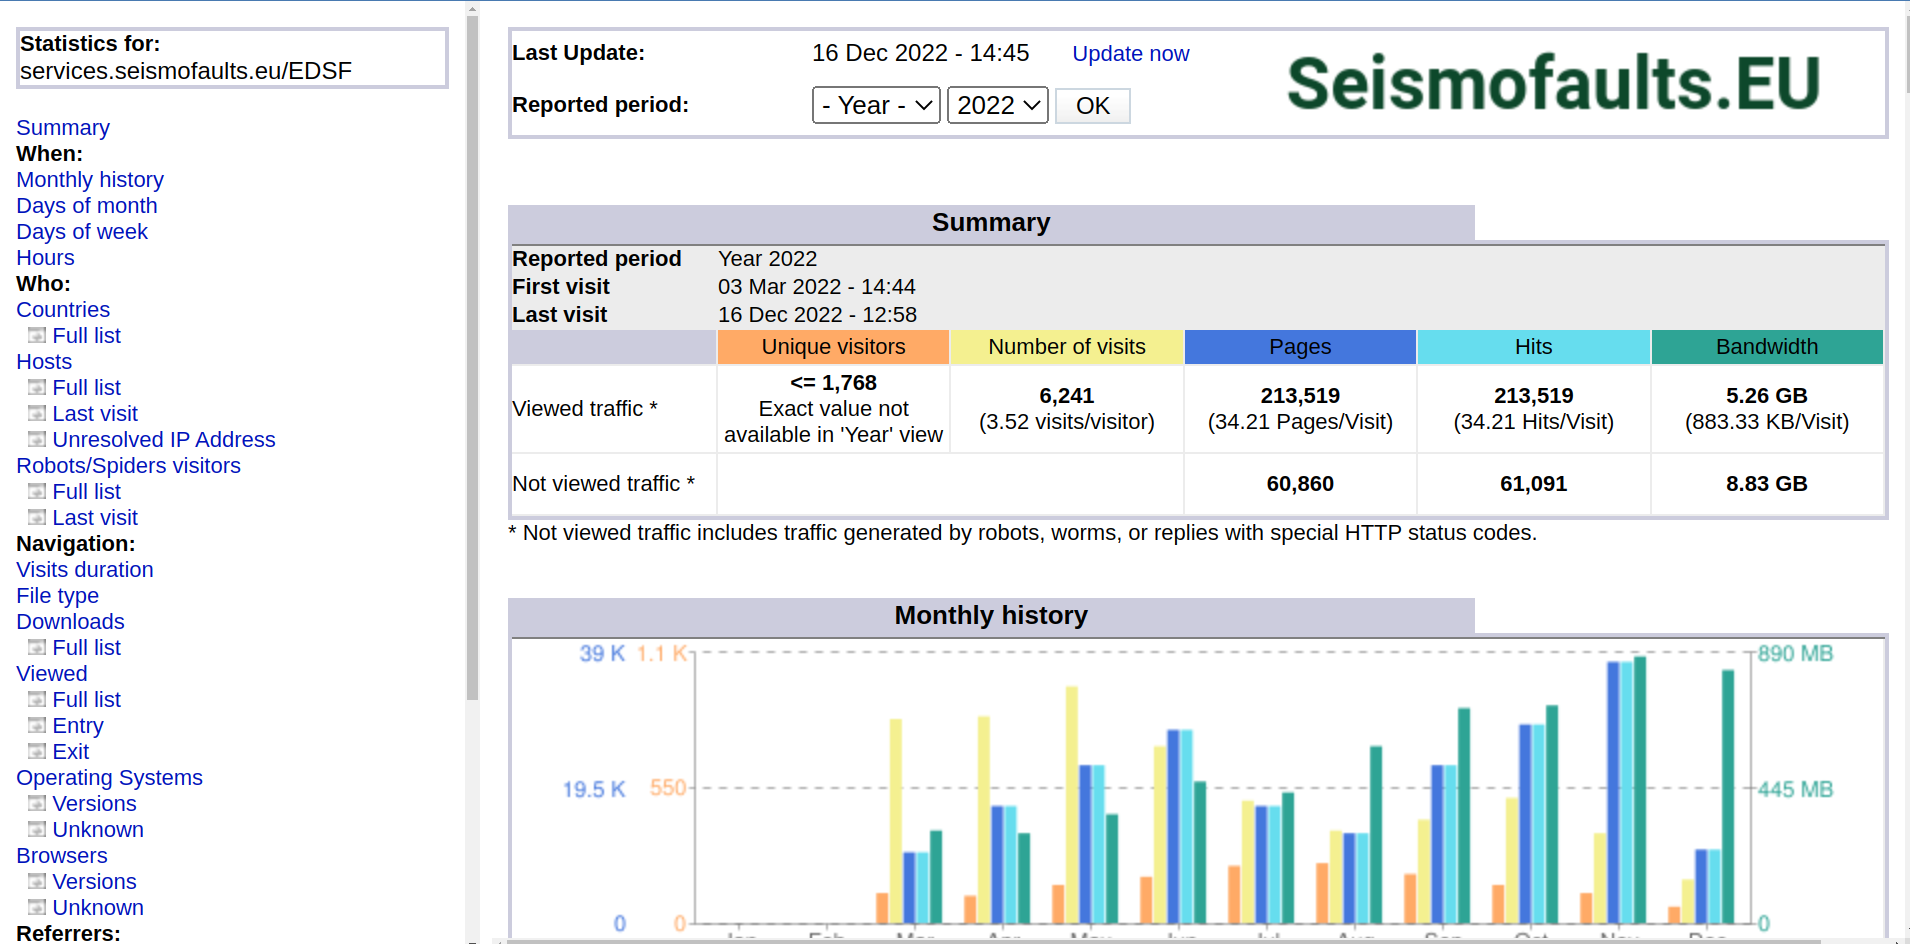 AWStats interface with access statistics to a web service (EDSF13 in this example)